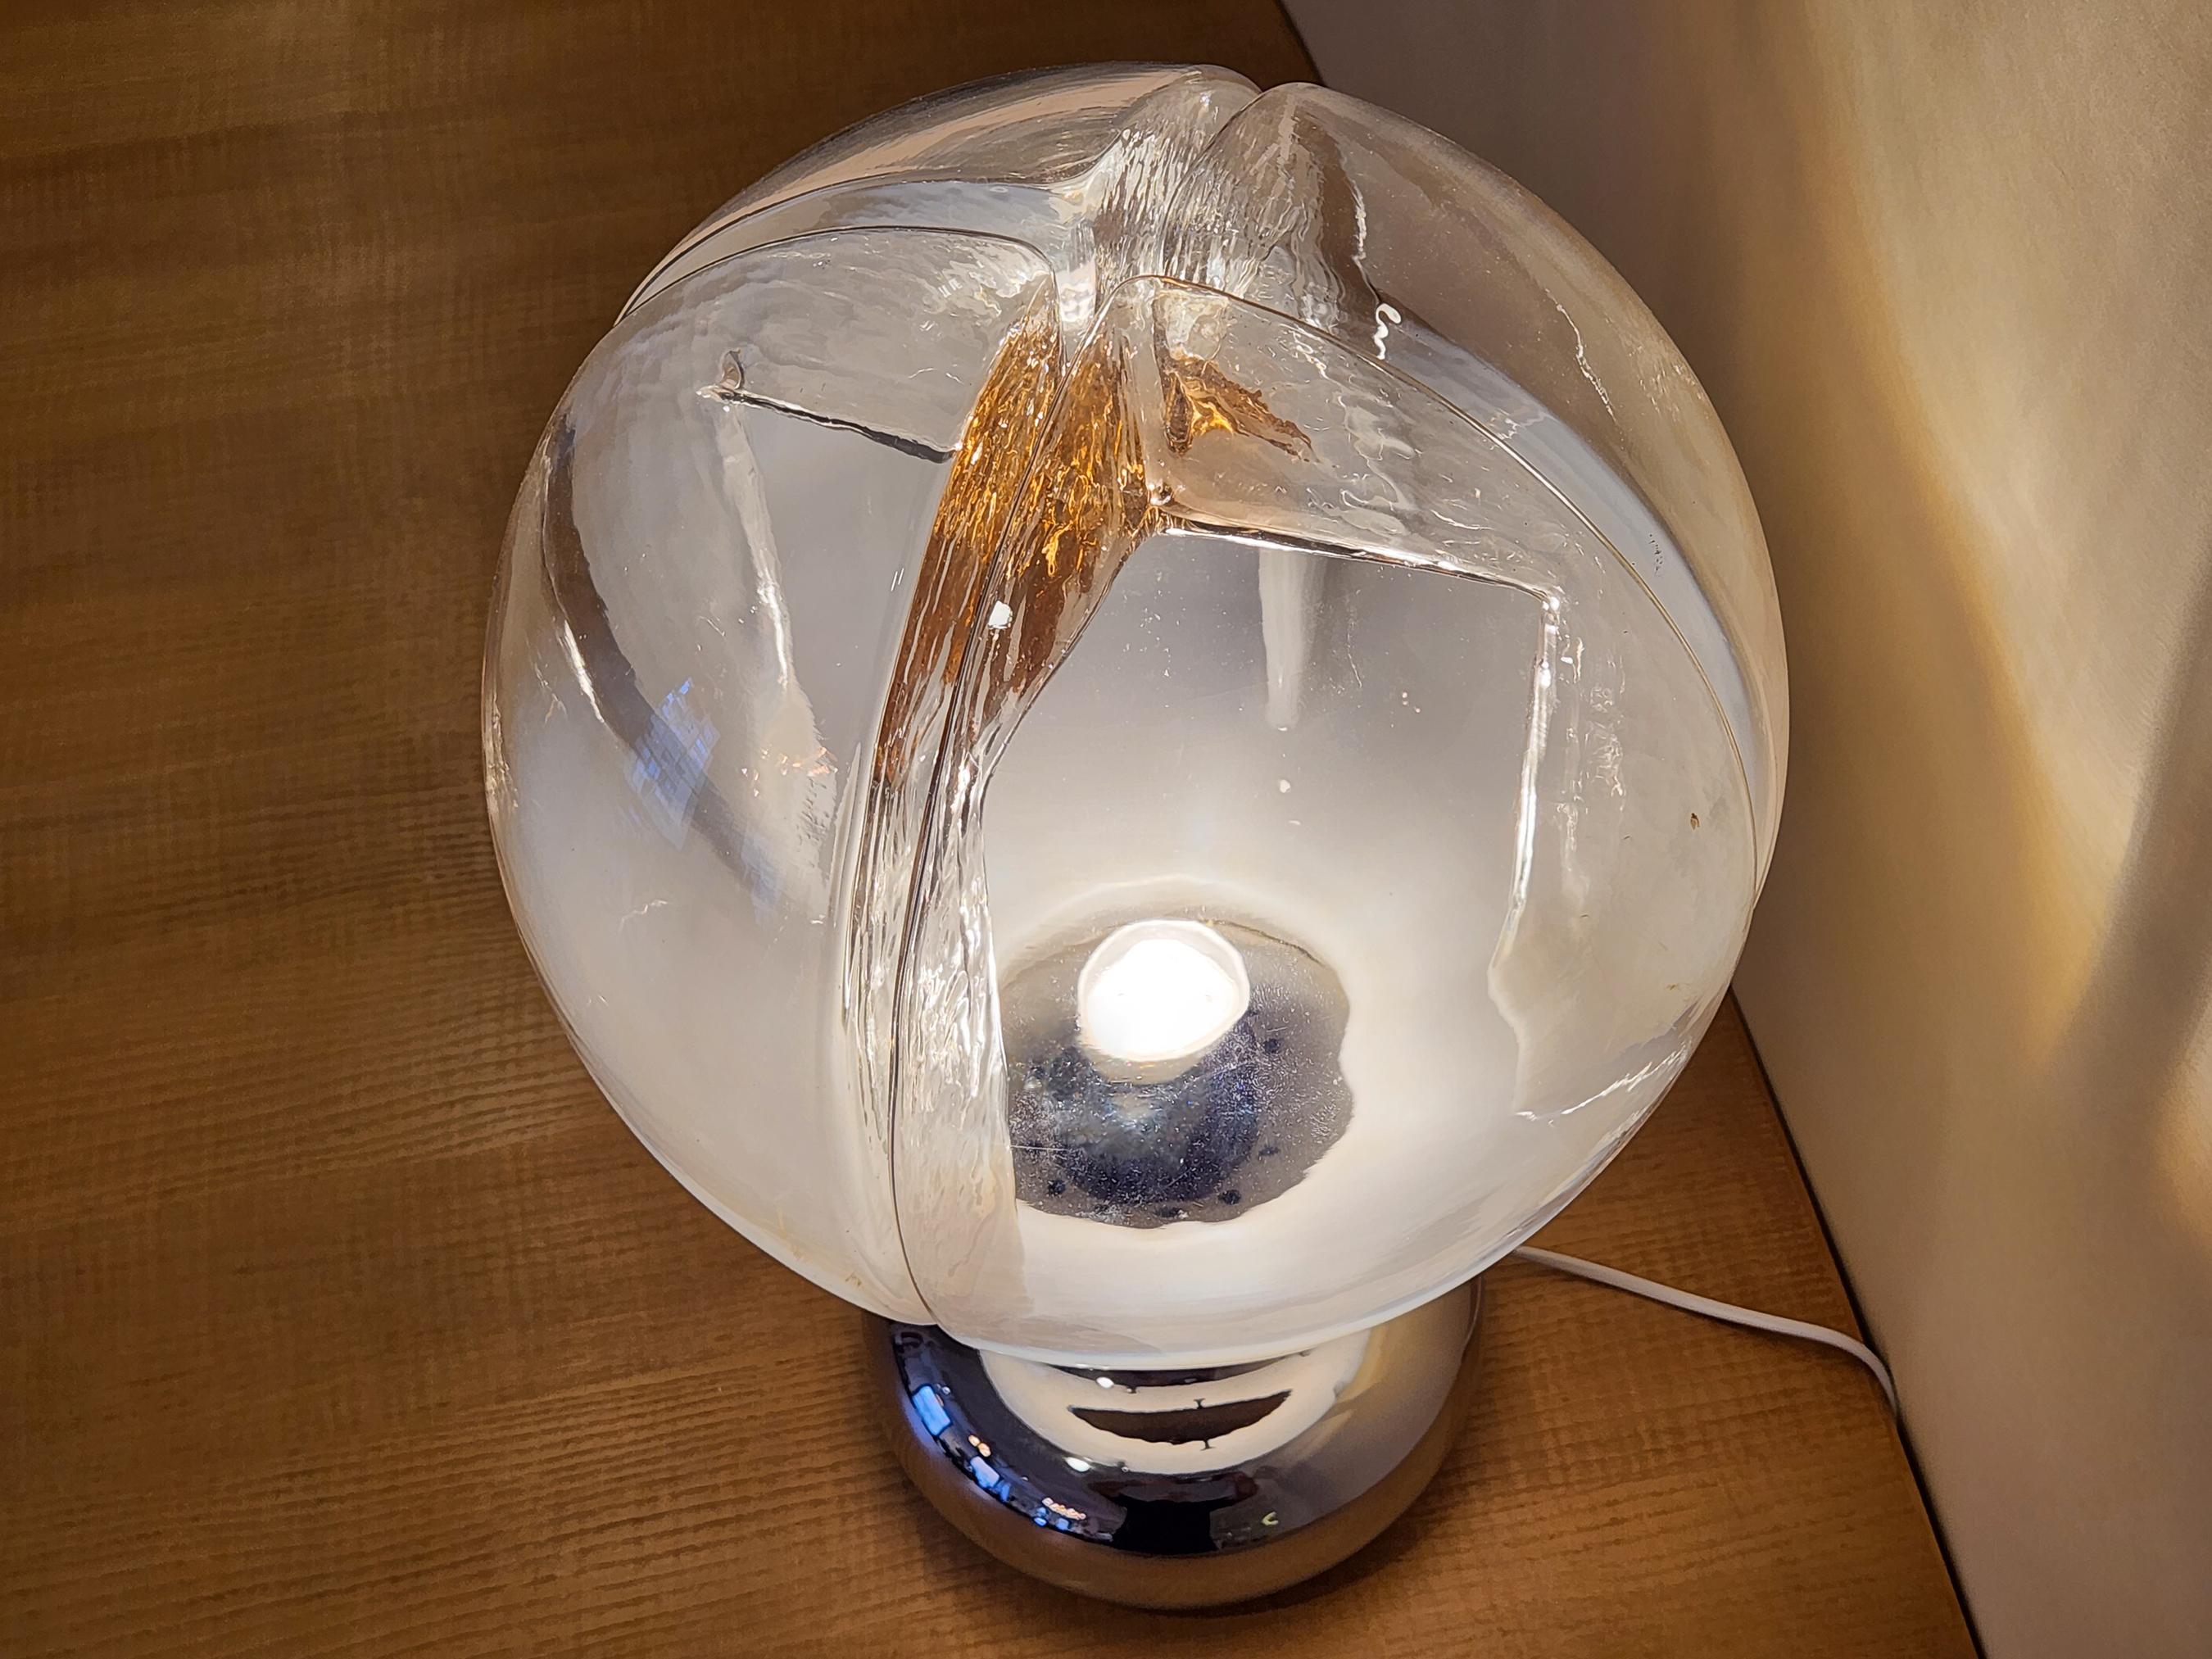 Mazzega Murano - Handblown Glass Sphere Table Lamp In Excellent Condition For Sale In Stratford, CT